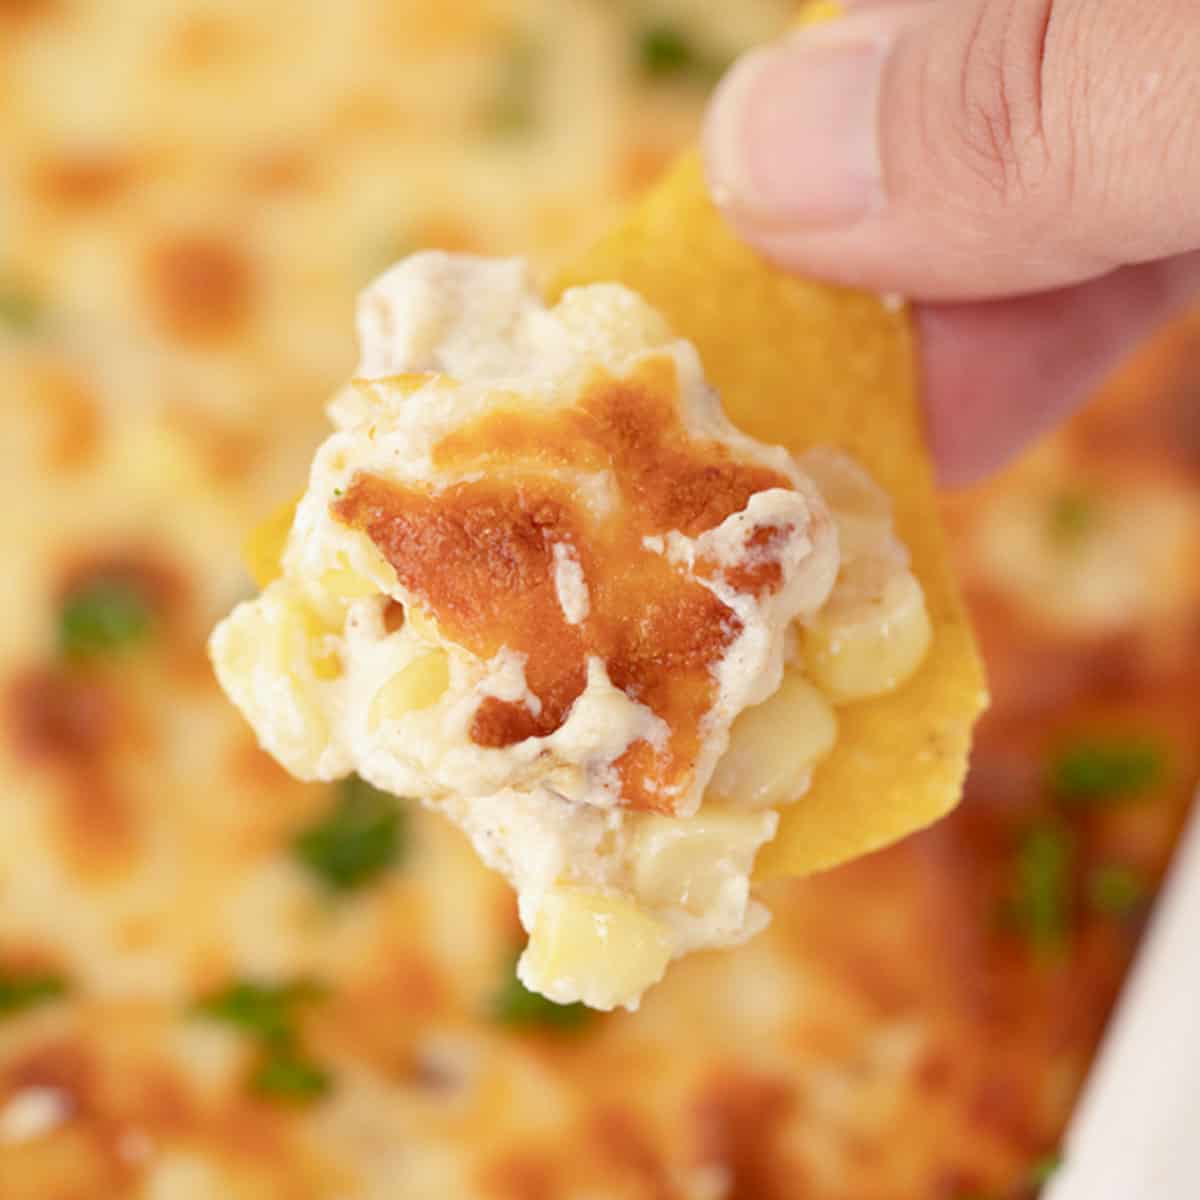 Easy Fiesta Corn Dip in a baking dish with a hand dipping a chip into it.